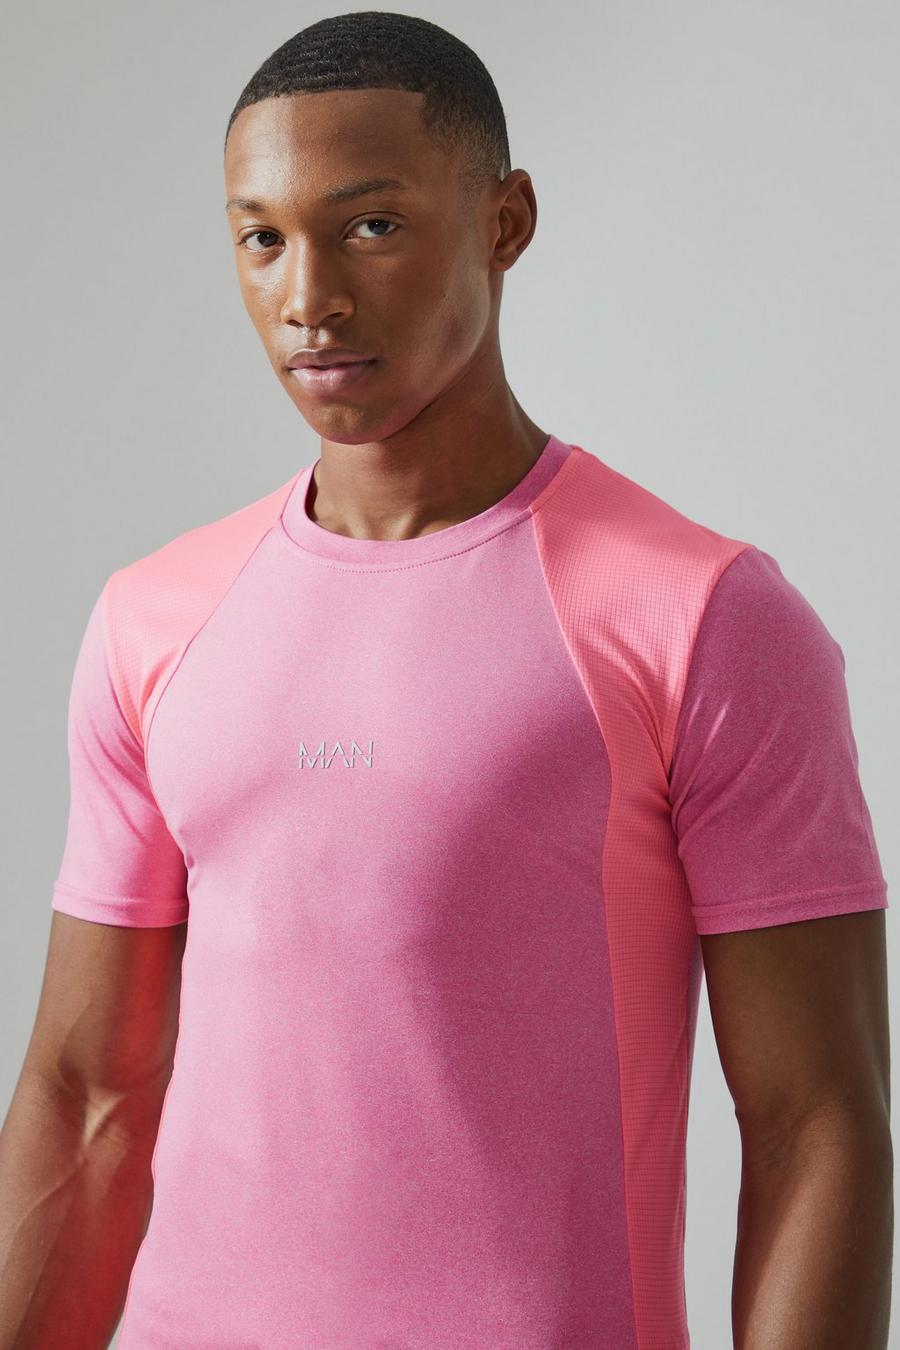 Man Active Muscle Fit Mesh Colorblock T-Shirt, Bright pink